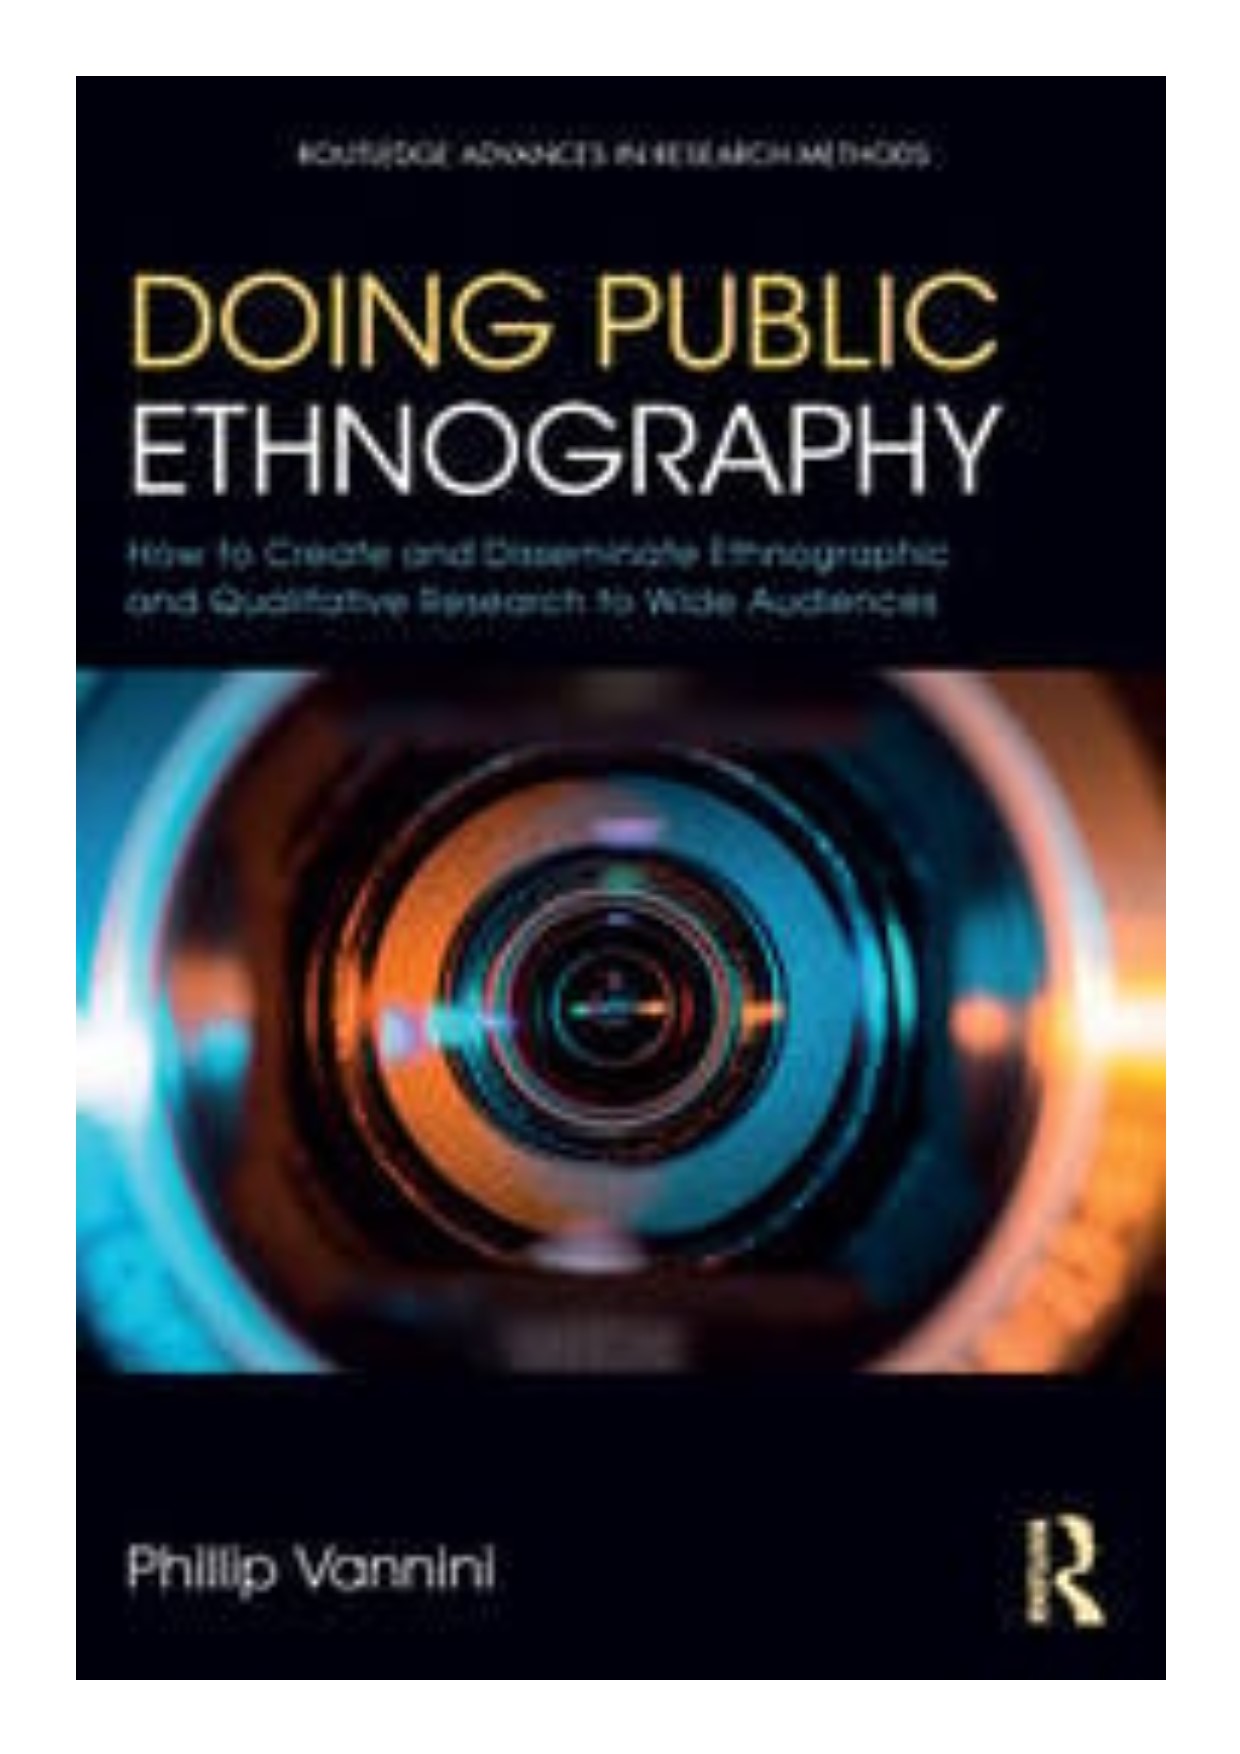 Doing public ethnography how to create and disseminate ethnographic and qualitative research to wide audiences